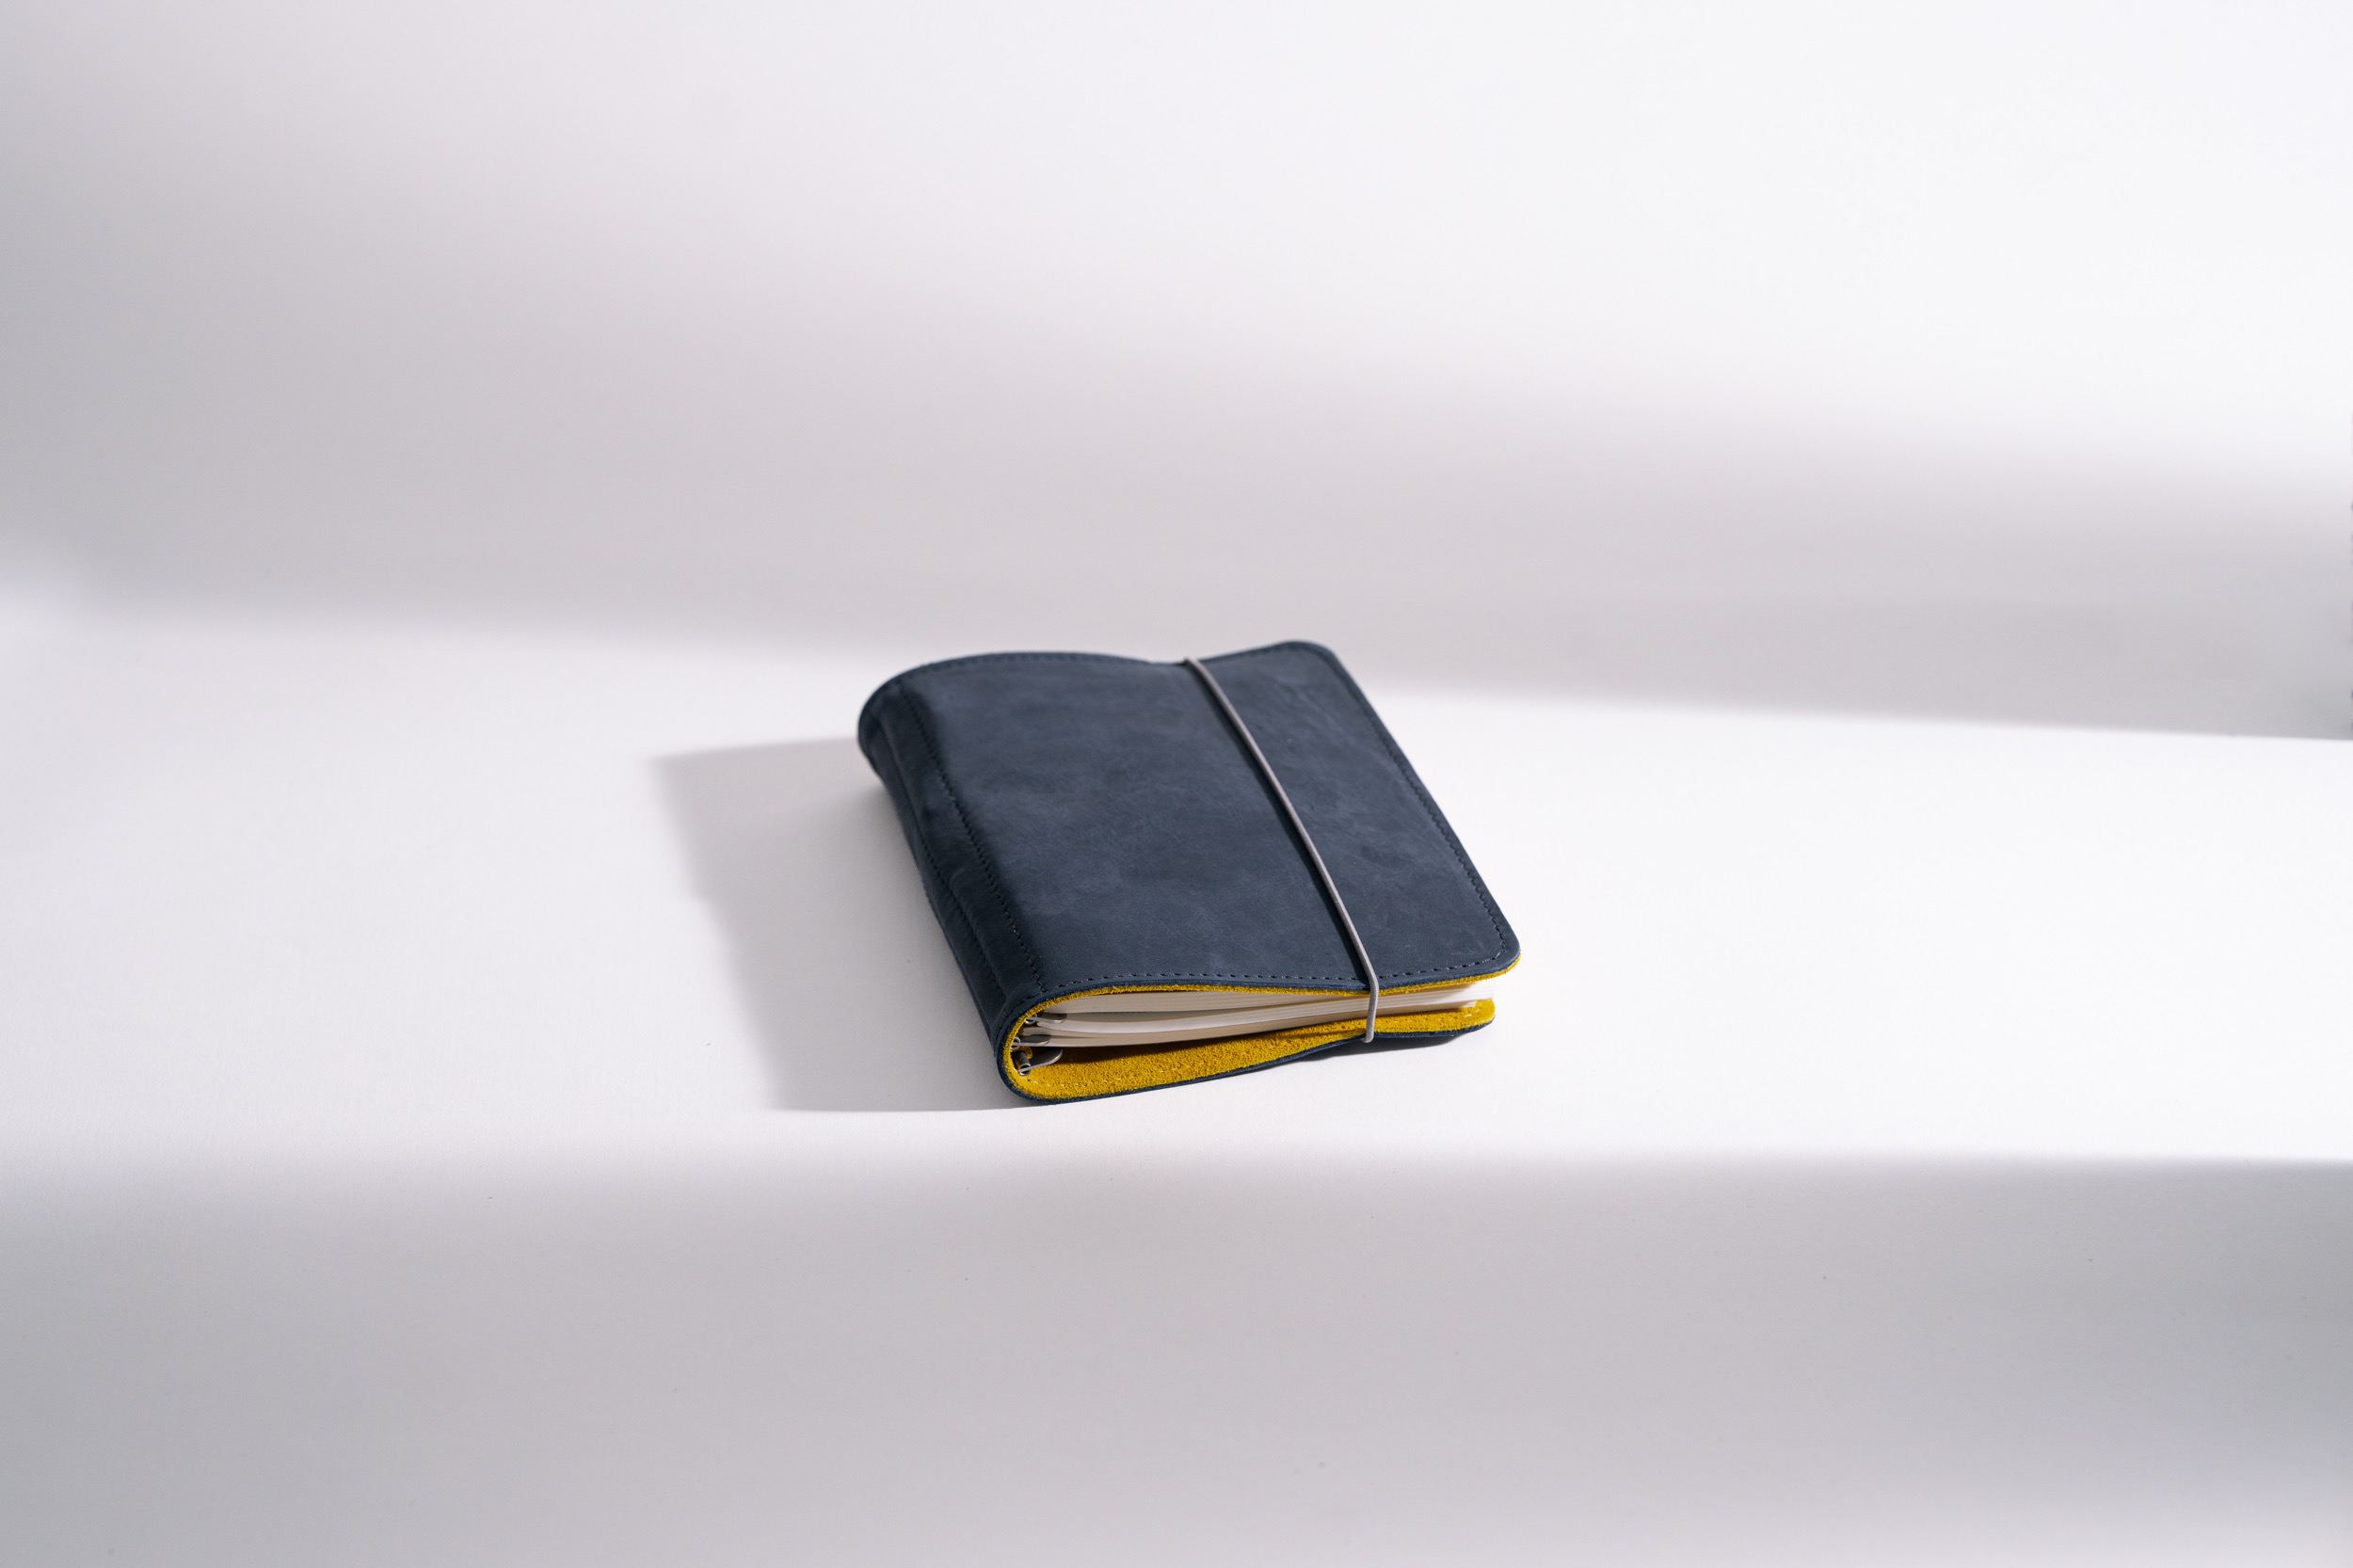 ROTERFADEN Organizer  SO_22 – Versatile design for B6 and M formats with 'Blue Angel' certified leather and elastic closure